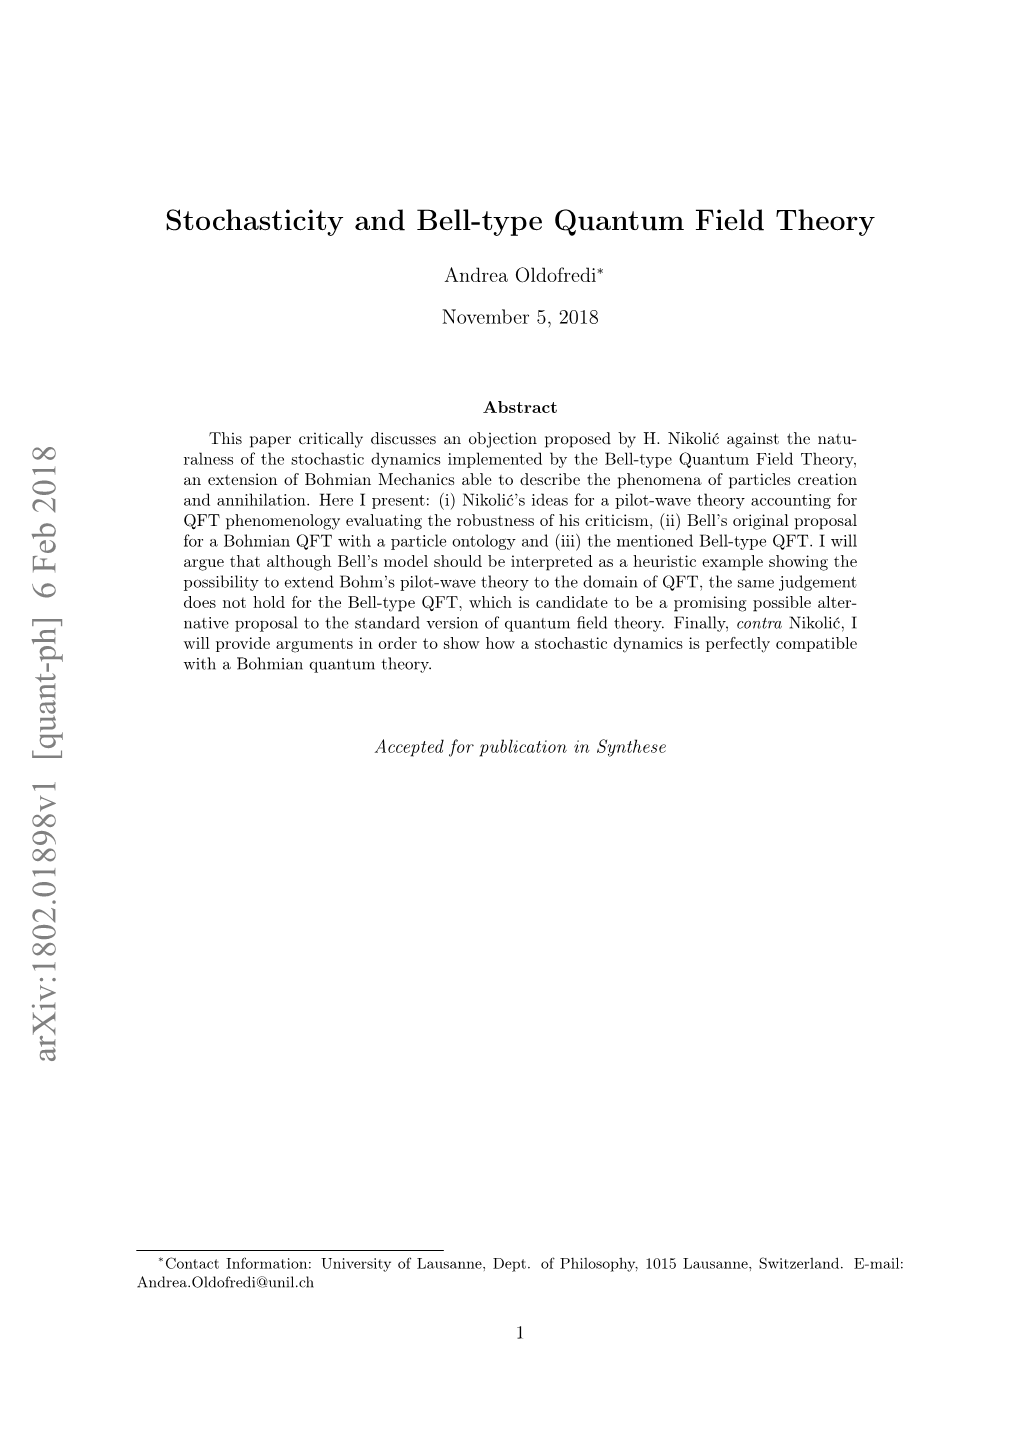 Stochasticity and Bell-Type Quantum Field Theory